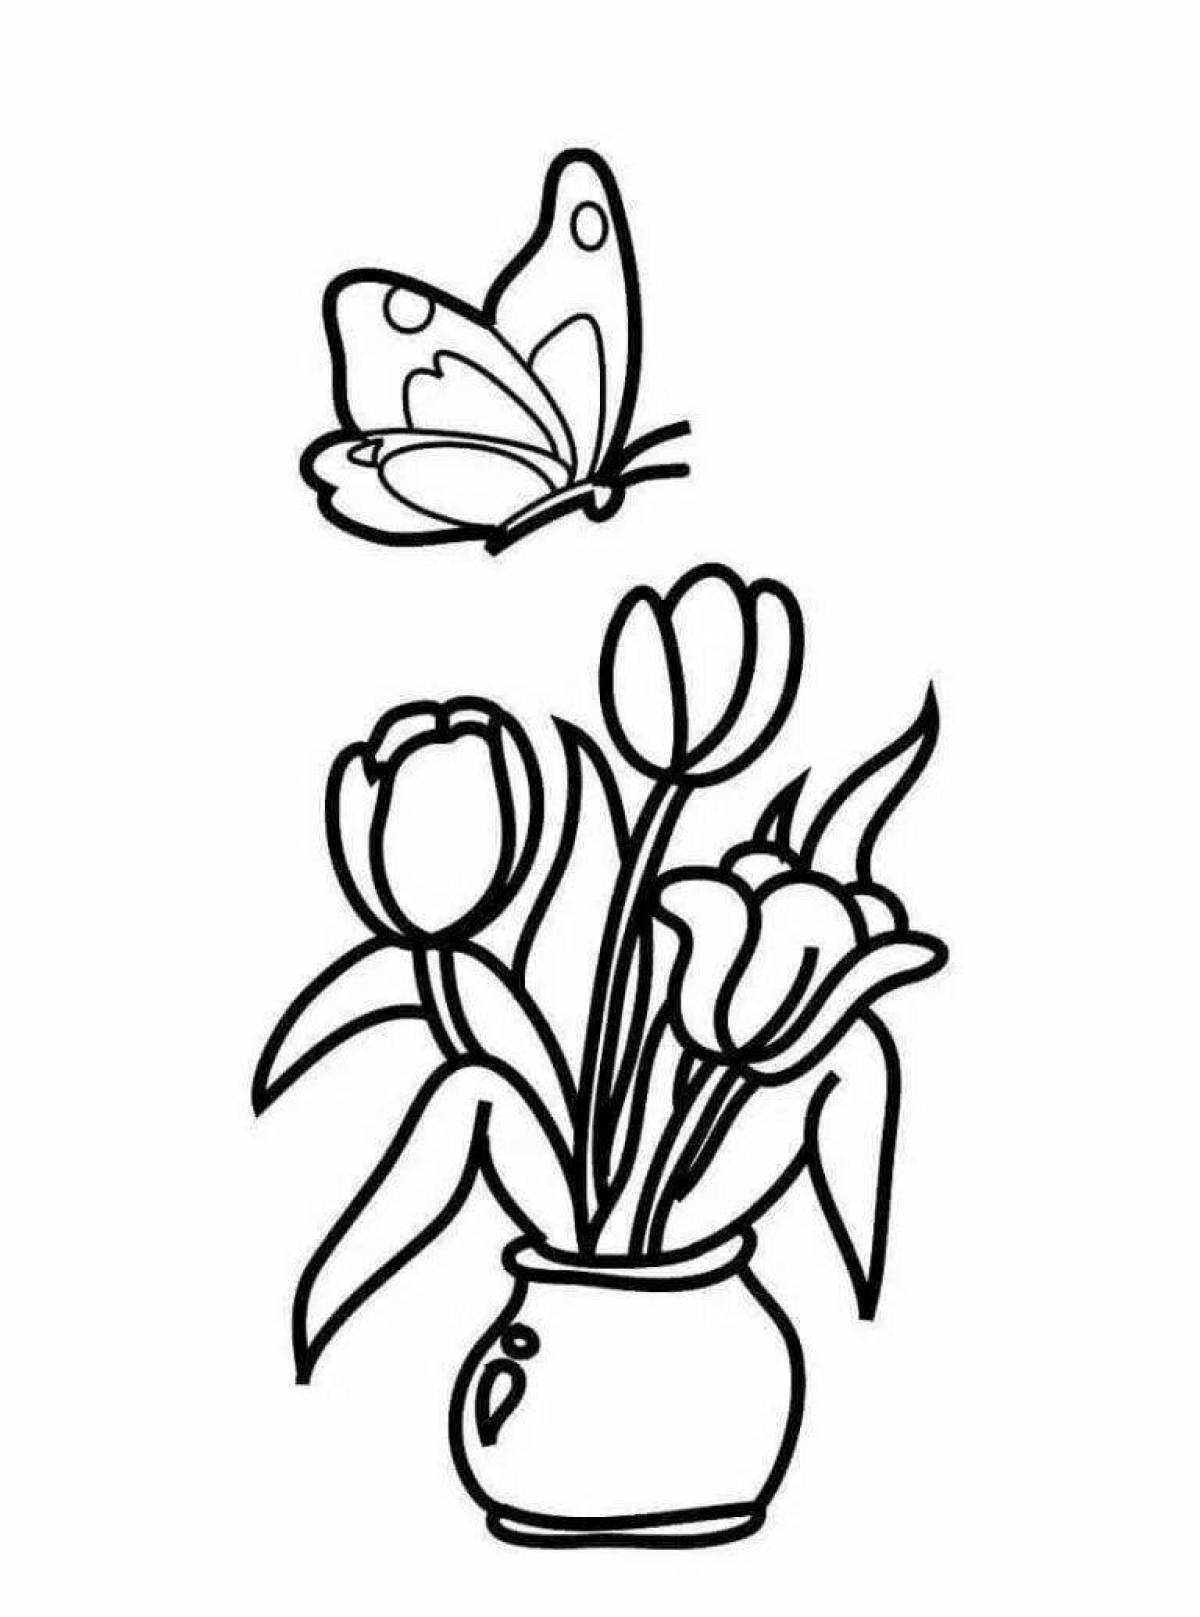 Coloring page dazzling tulips for March 8